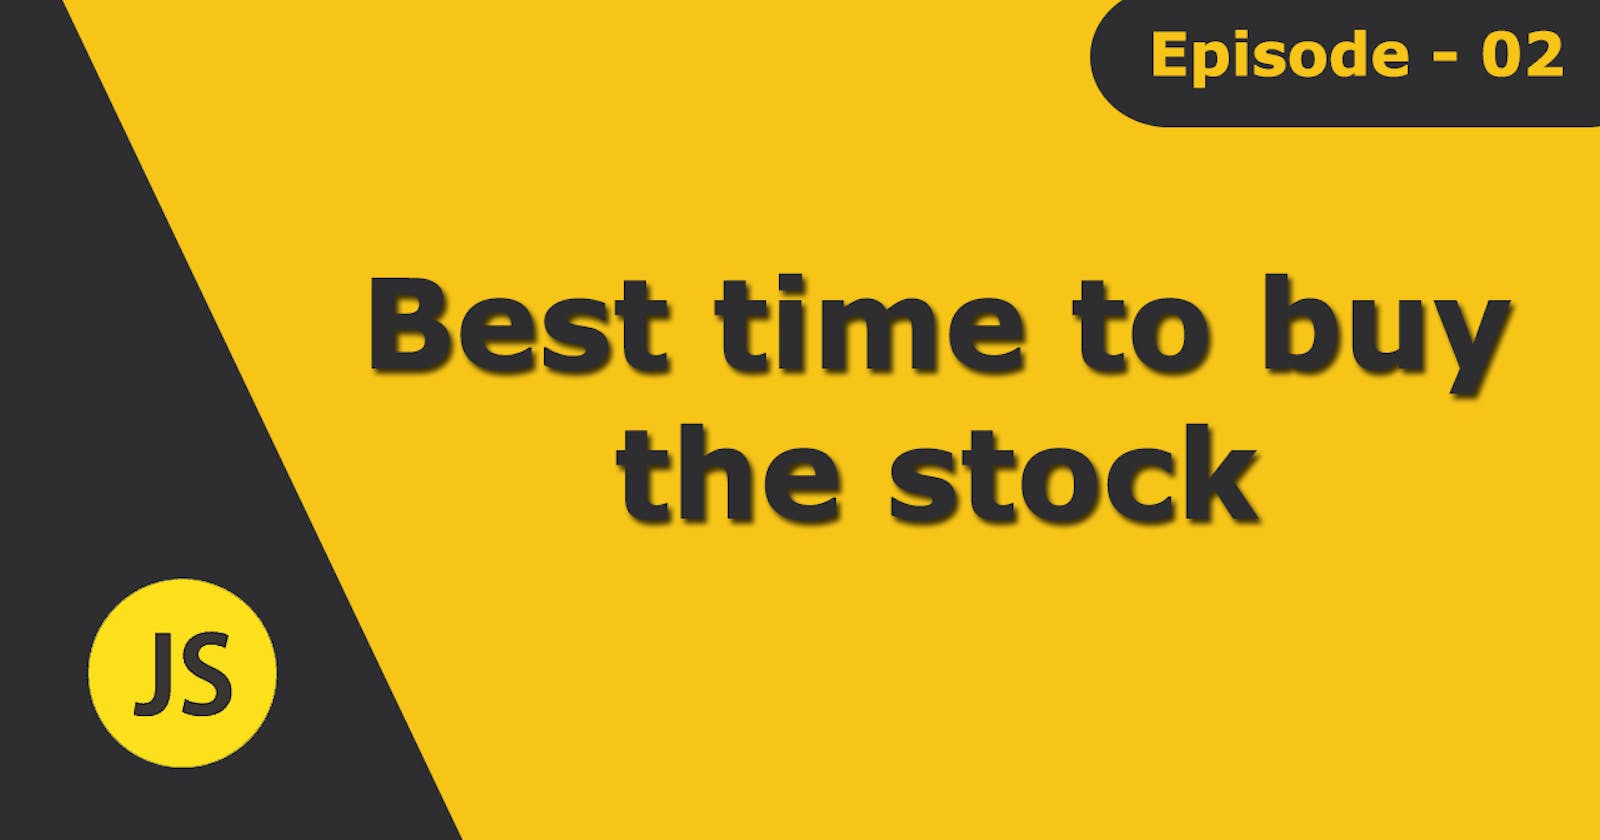 Episode 02 - Best time to buy the stock